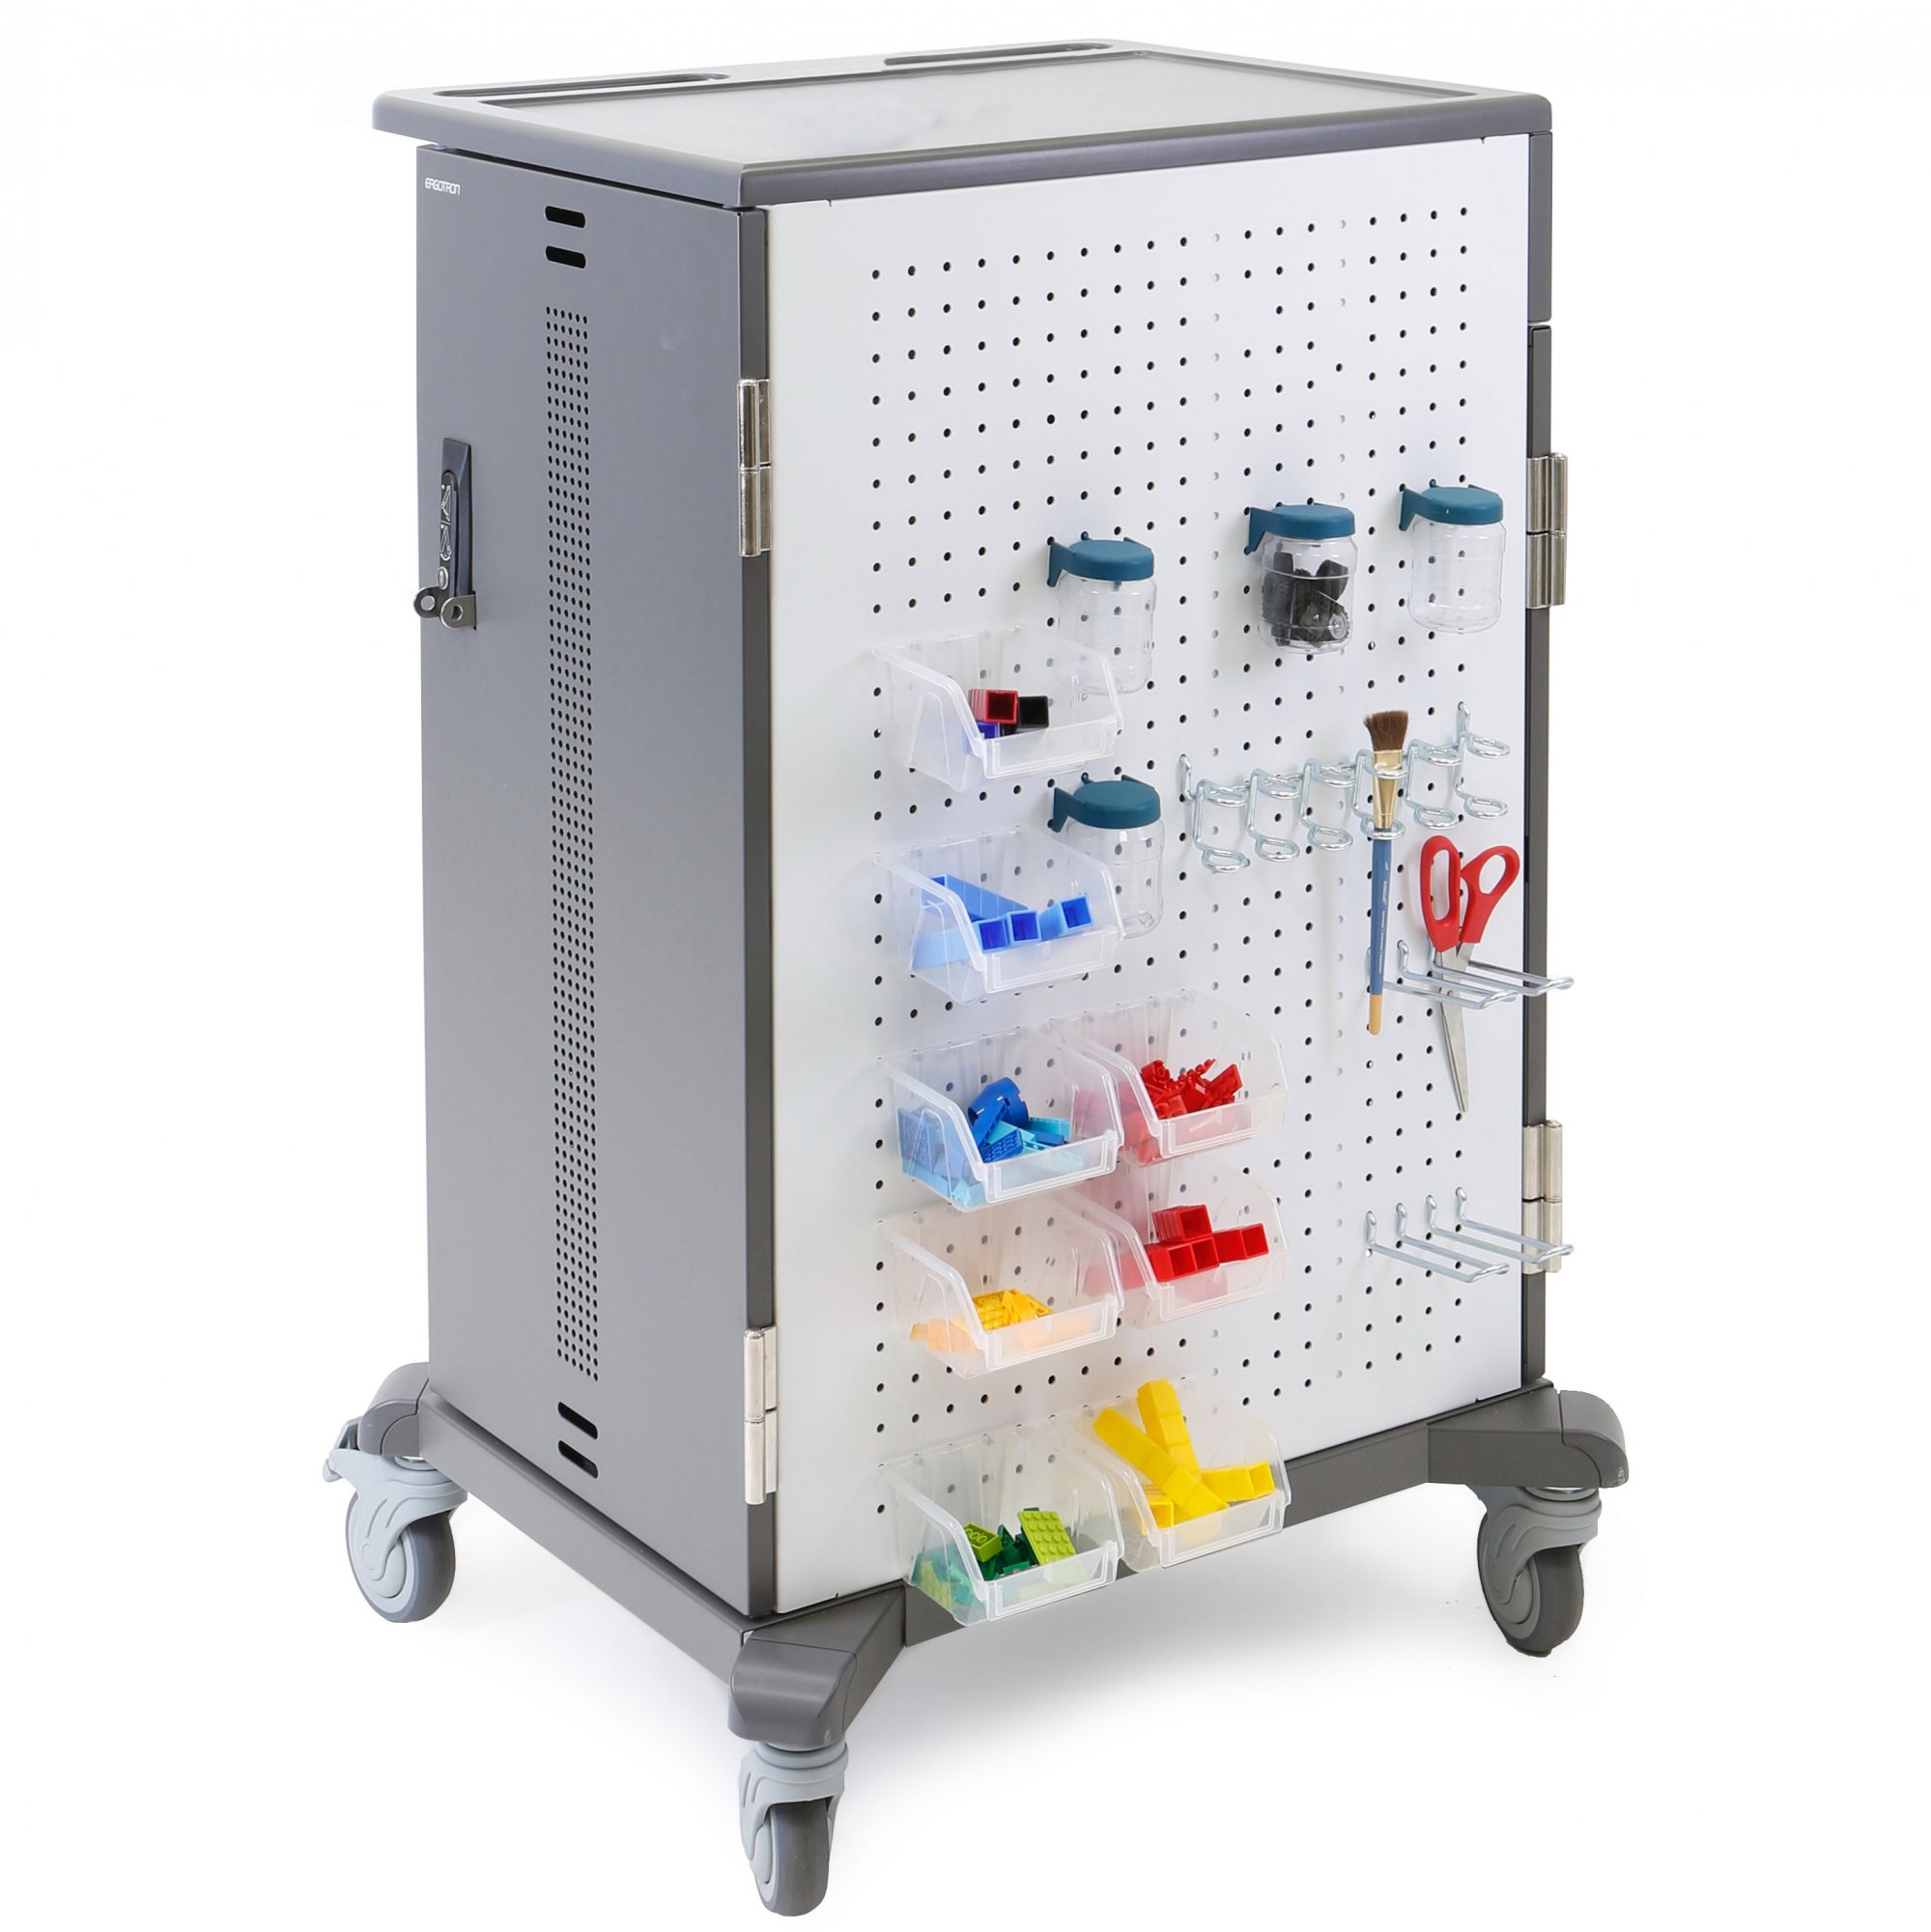 Easy storage - Includes bins, jars and loops for tools and supplies